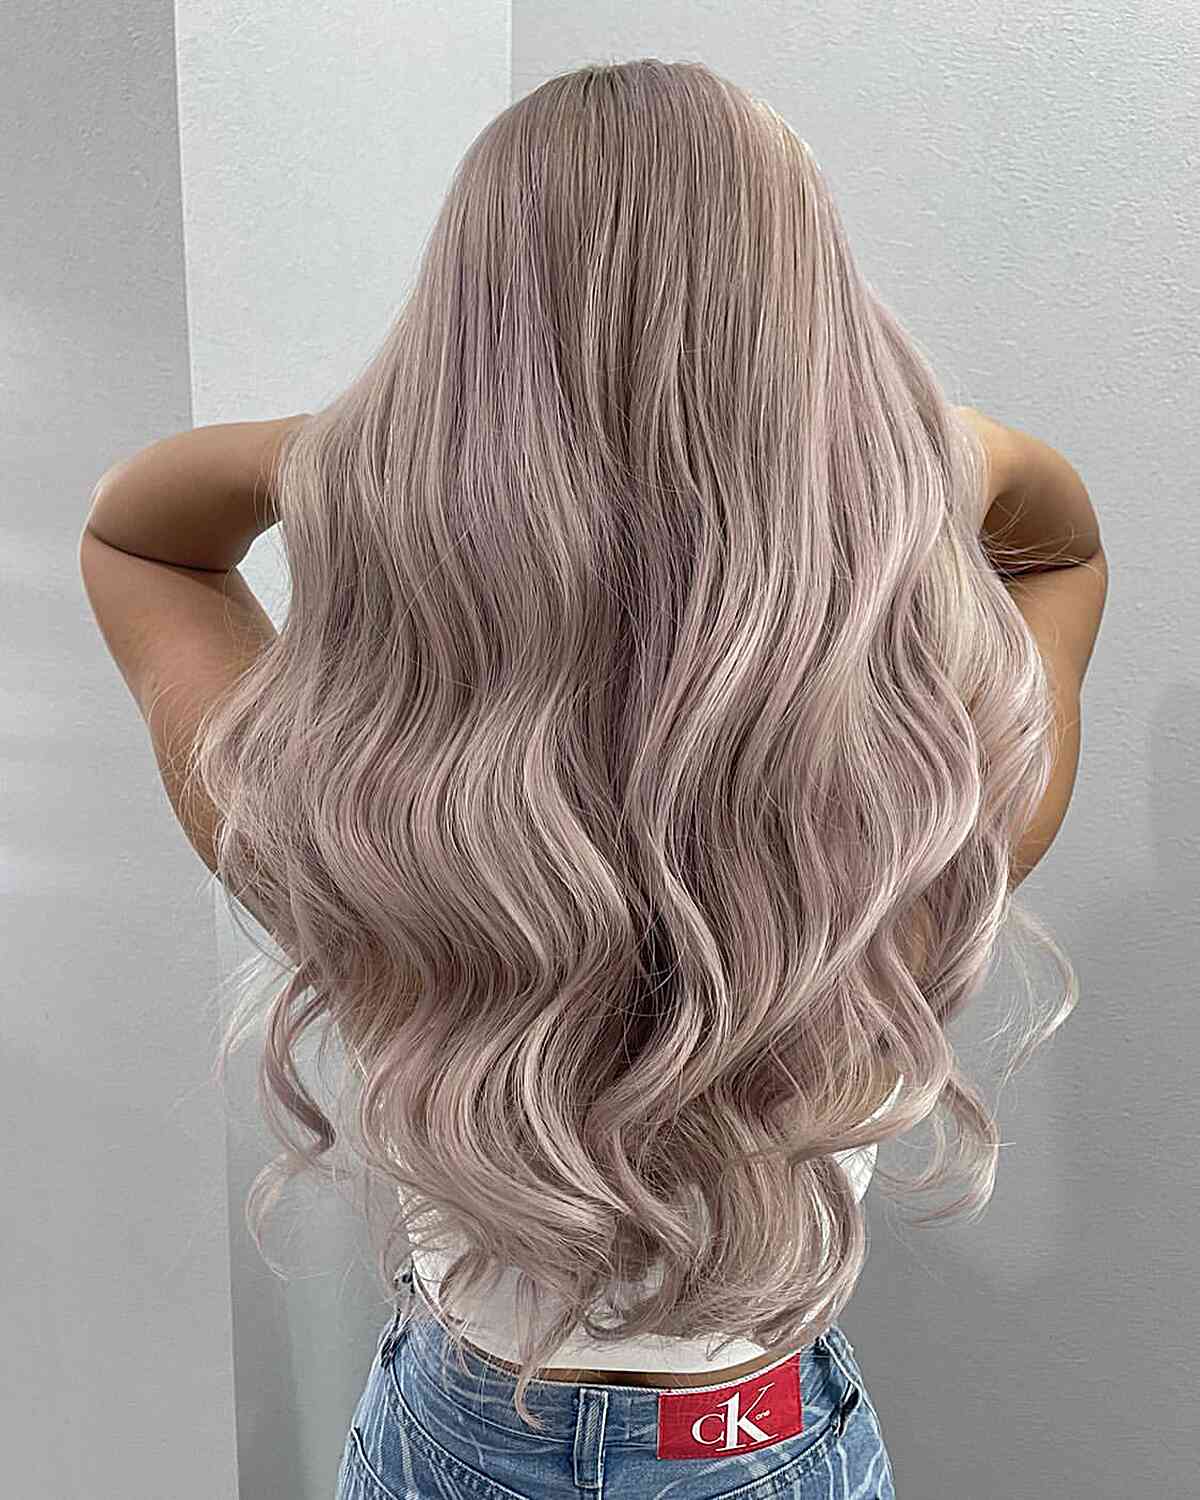 Light Pearl Blonde Hair Color on long curled hair